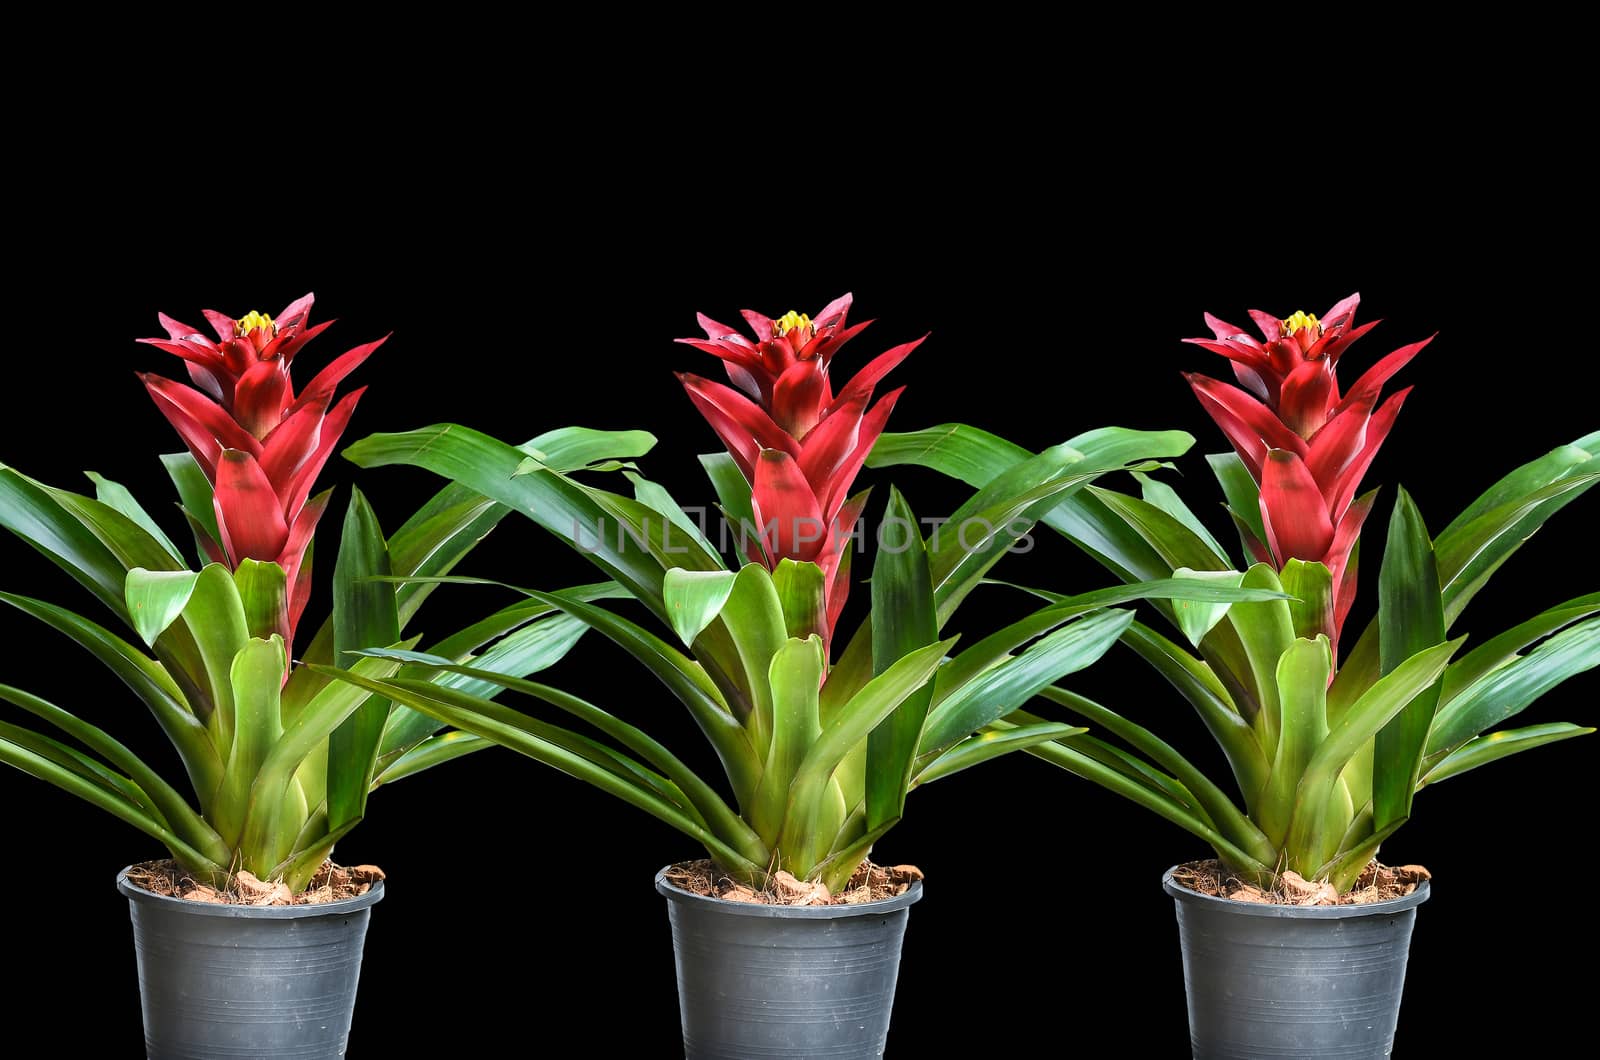 Blossoming plant of guzmania  by raweenuttapong